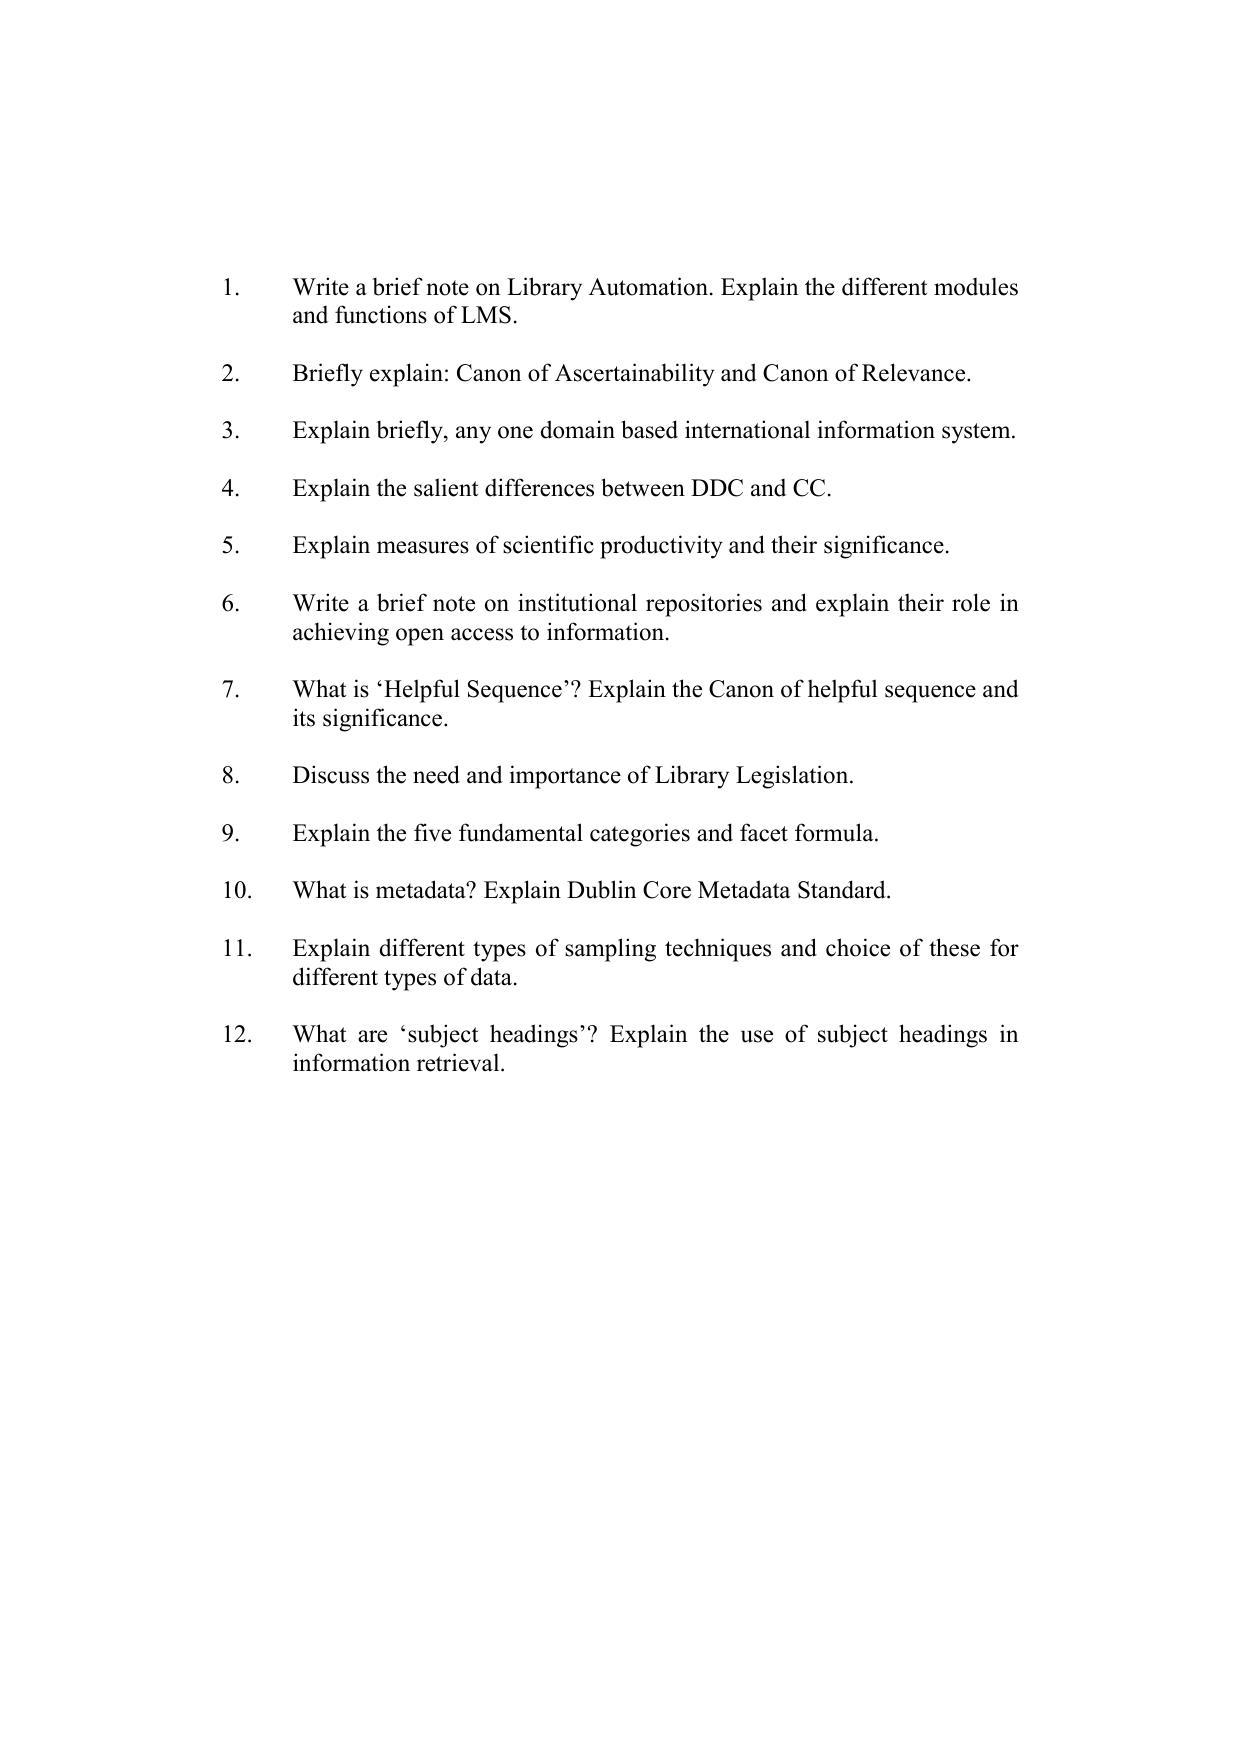 ISI Admission Test JRF in Library and Information Science LIB 2021 Sample Paper - Page 1